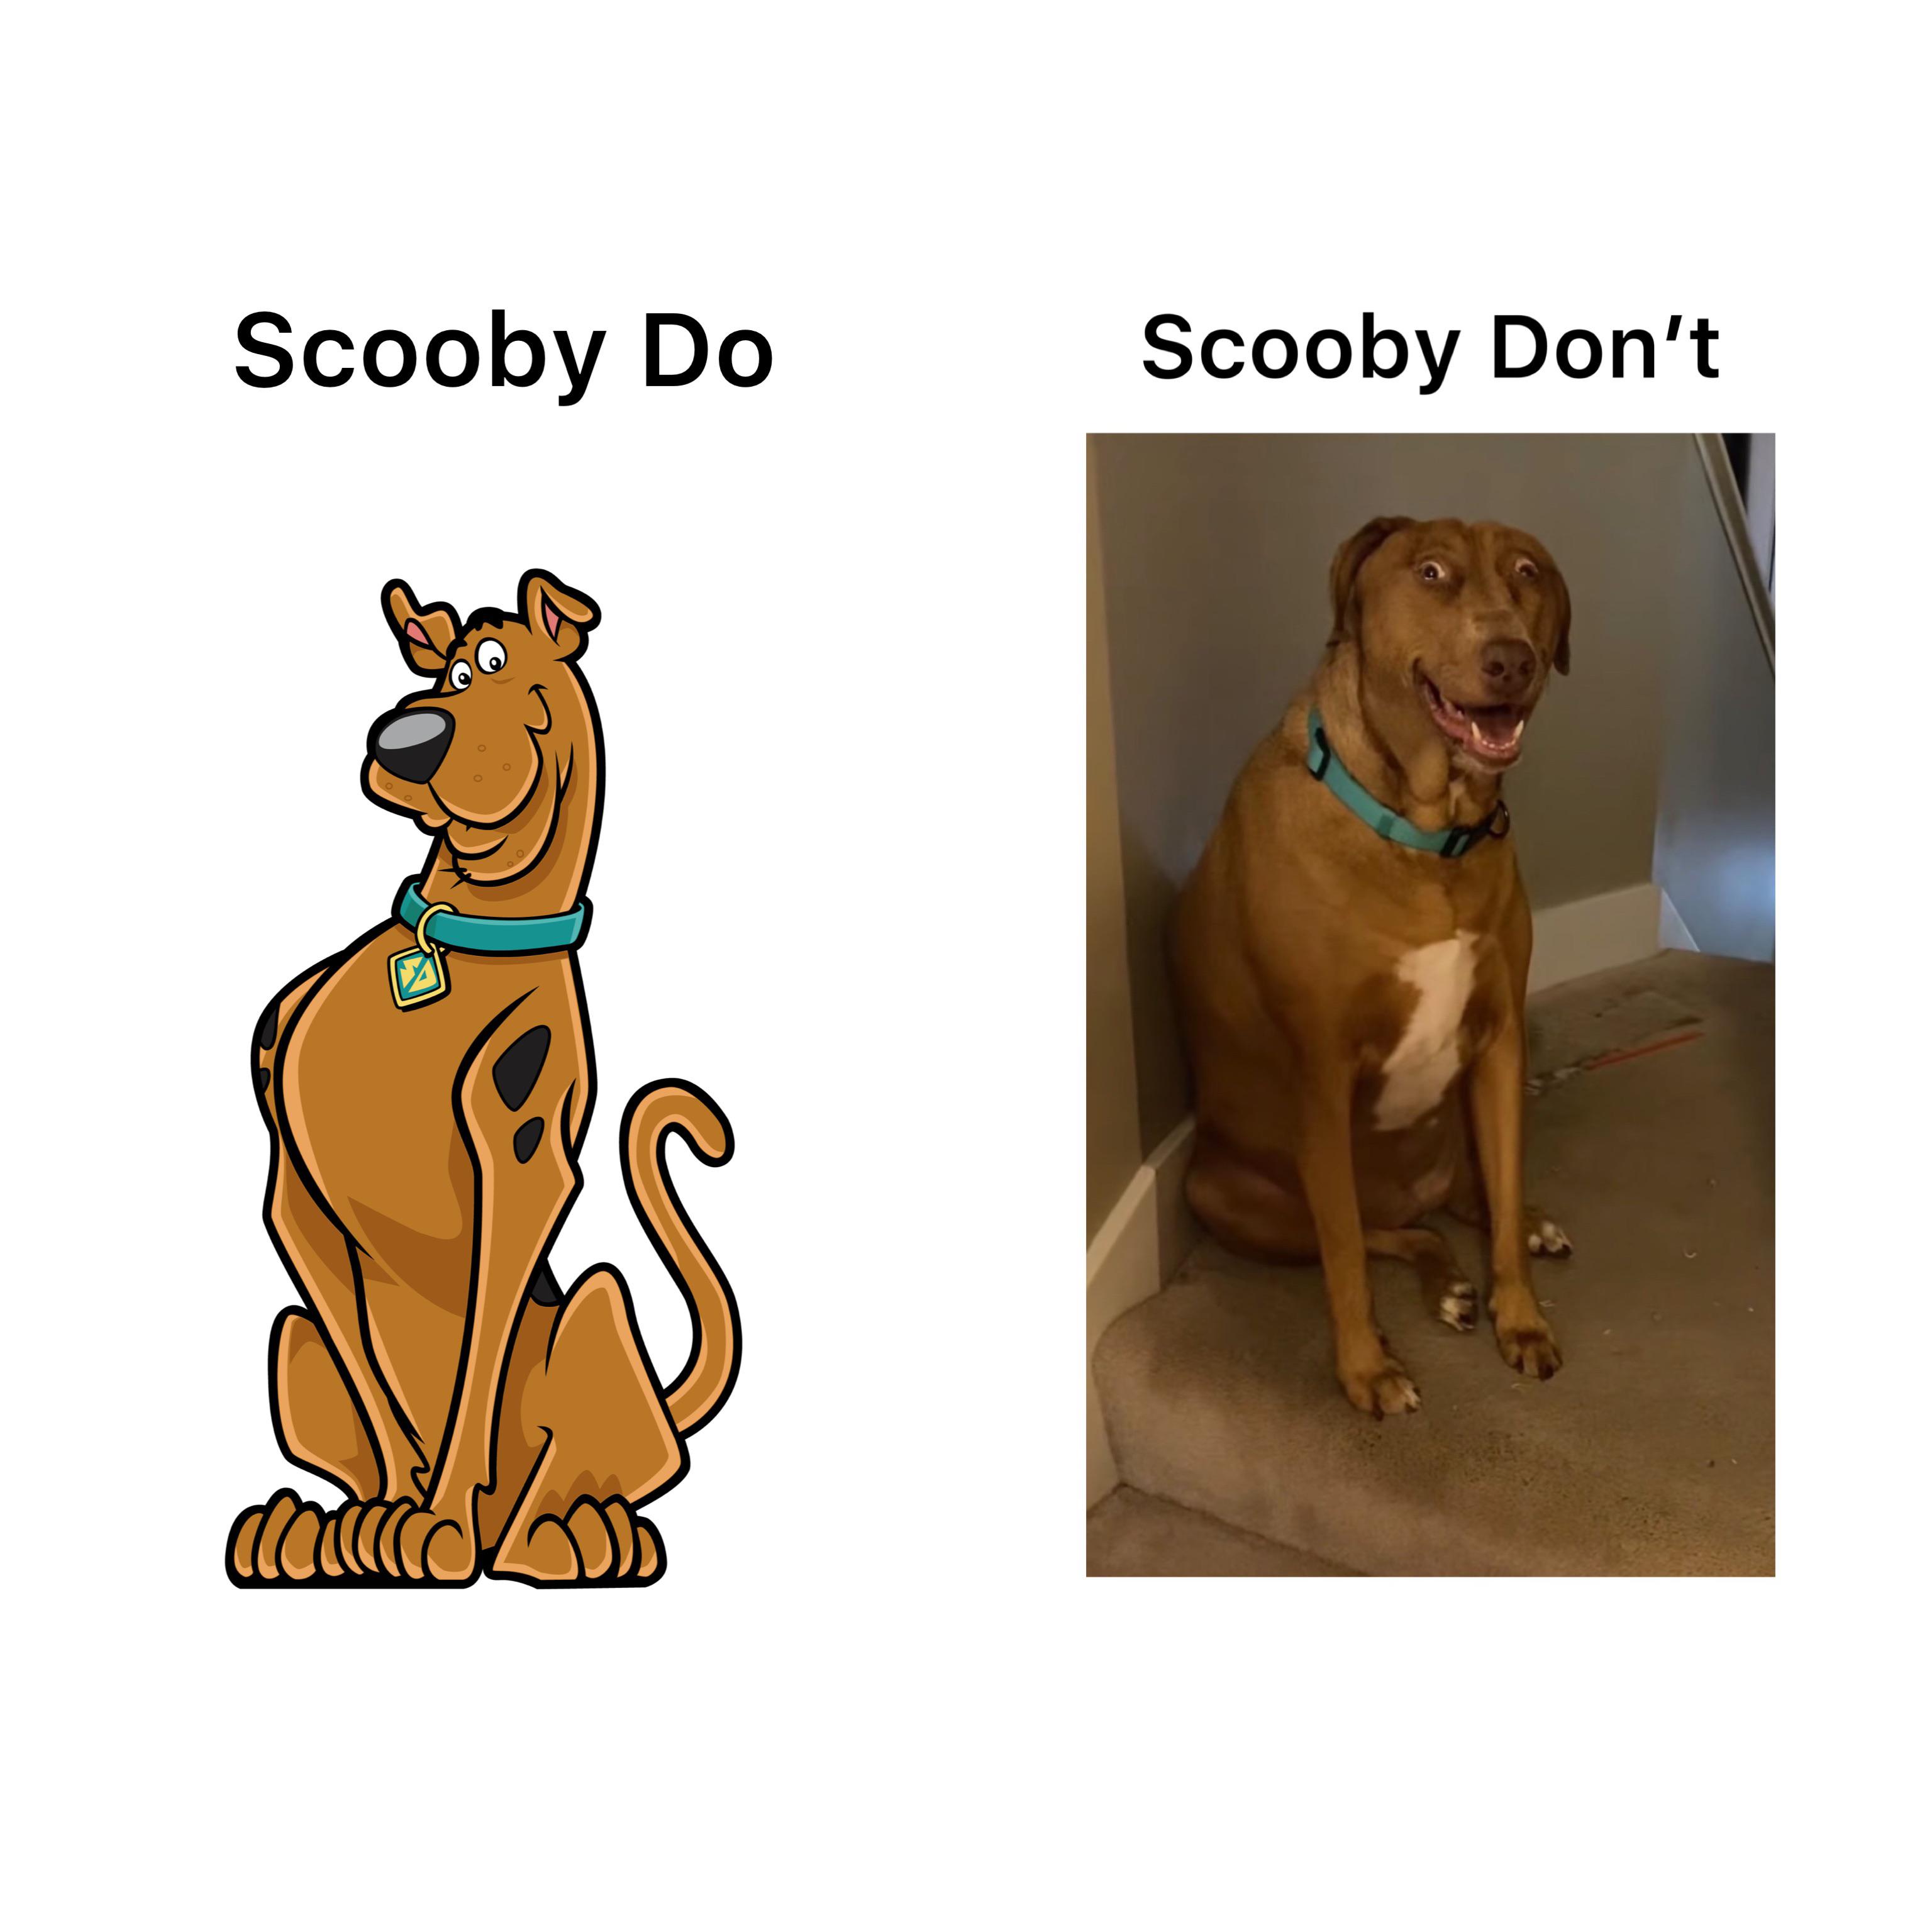 Monday Morning Randomness - FiGPiN - Scooby Do do Scooby Don't